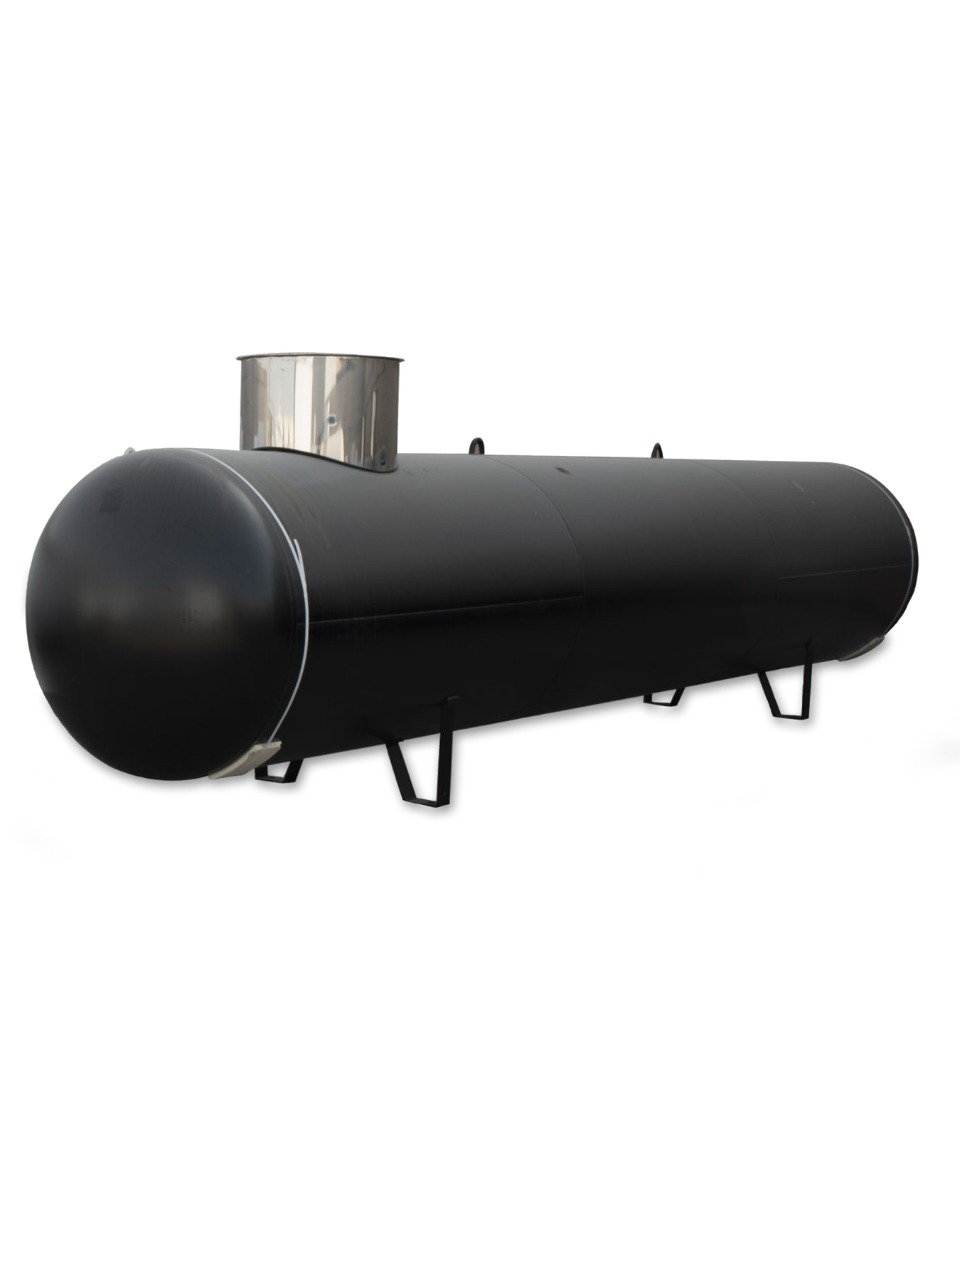 LPG TANK 10750 LITERS UNDER GROUND WITH FITTINGS